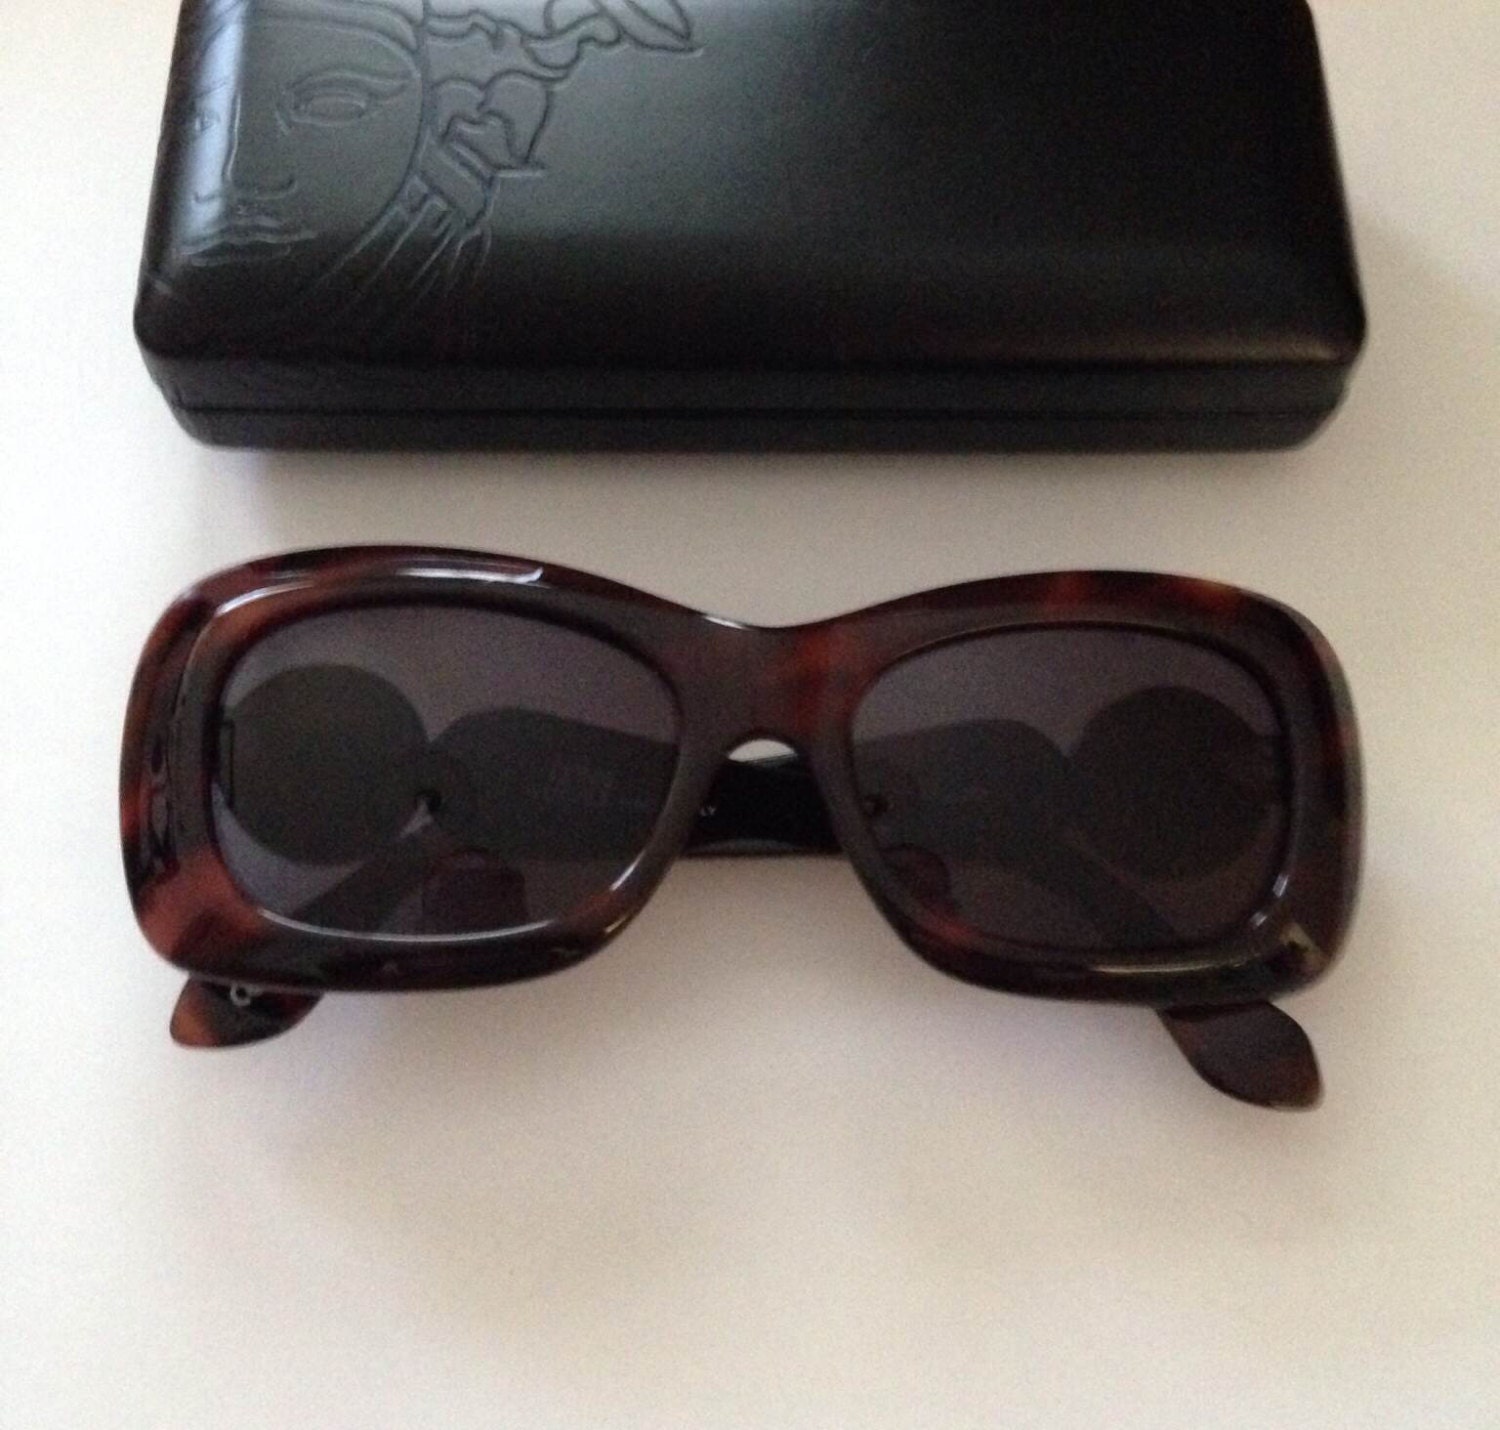 Beautiful Rare 1990s Gianni Versace Made in Italy Sunglasses - Etsy